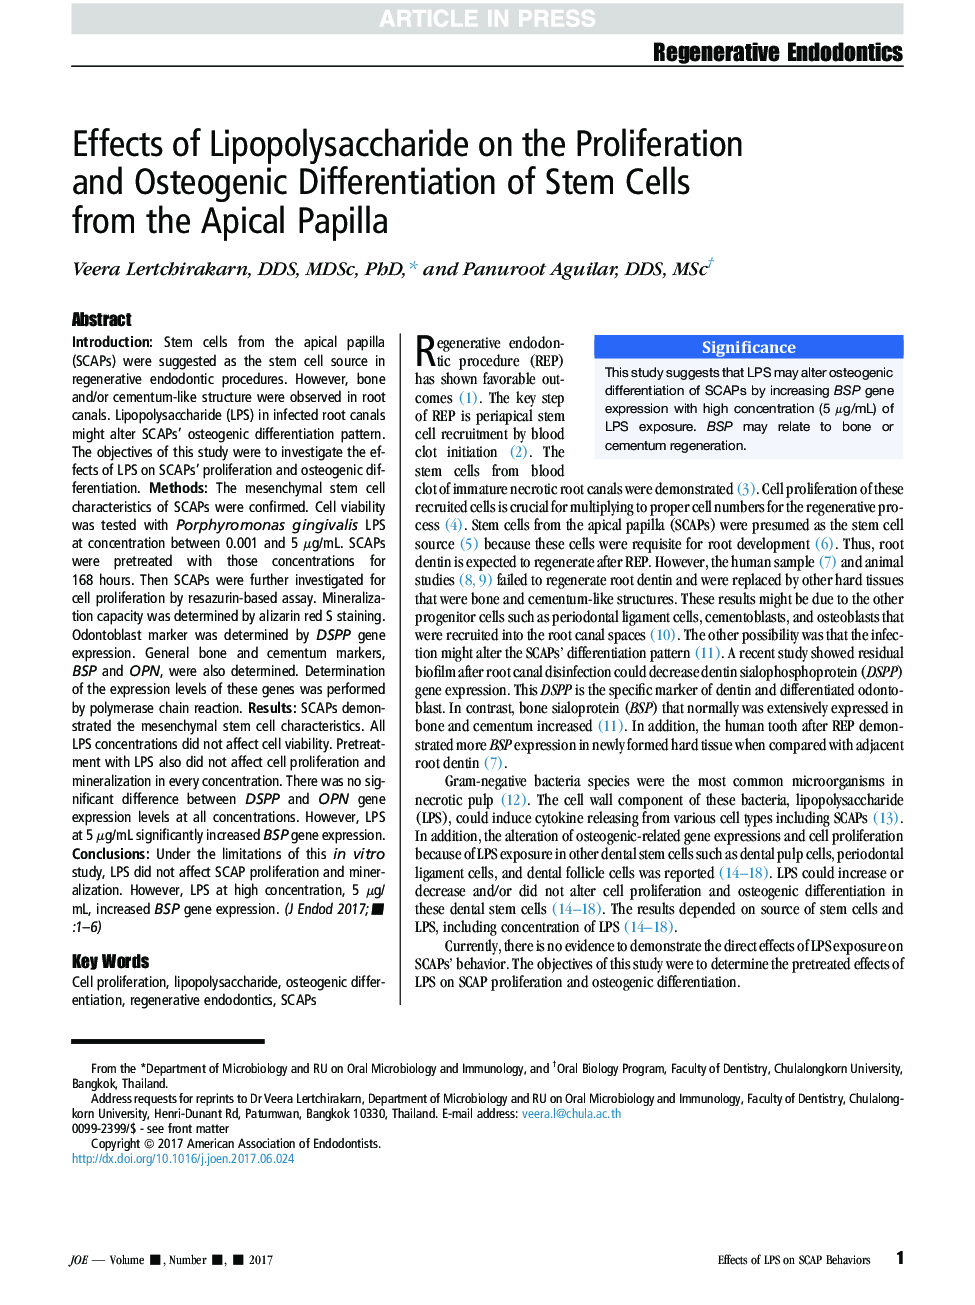 Effects of Lipopolysaccharide on the Proliferation and Osteogenic Differentiation of Stem Cells from the Apical Papilla